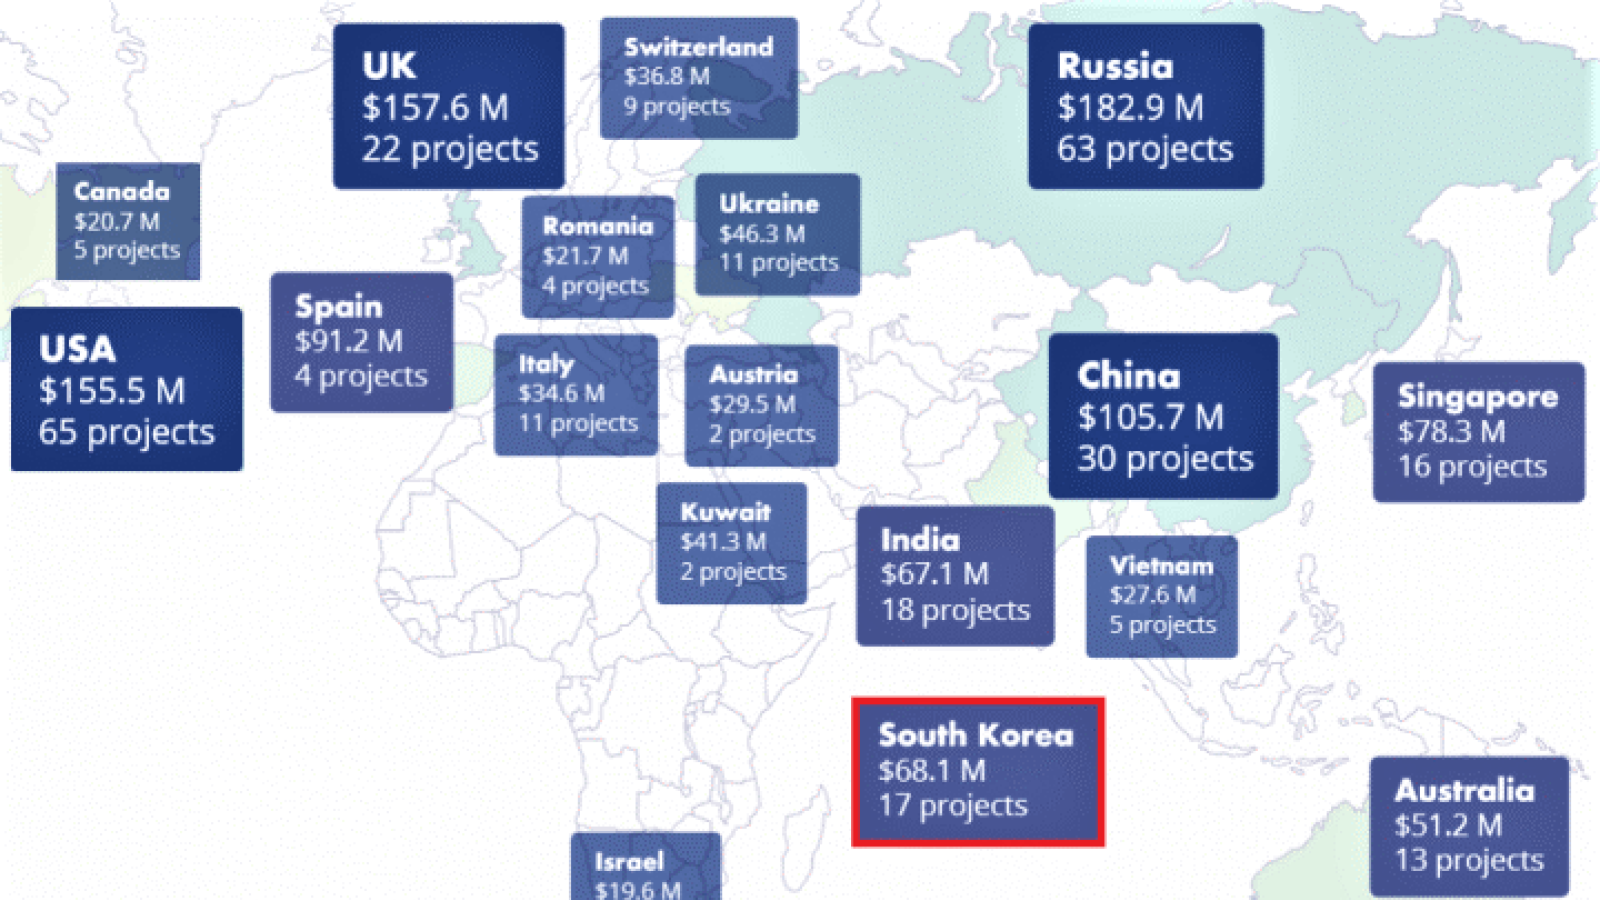 Geographical distribution of projects based on origin of the project team, Q3 2018